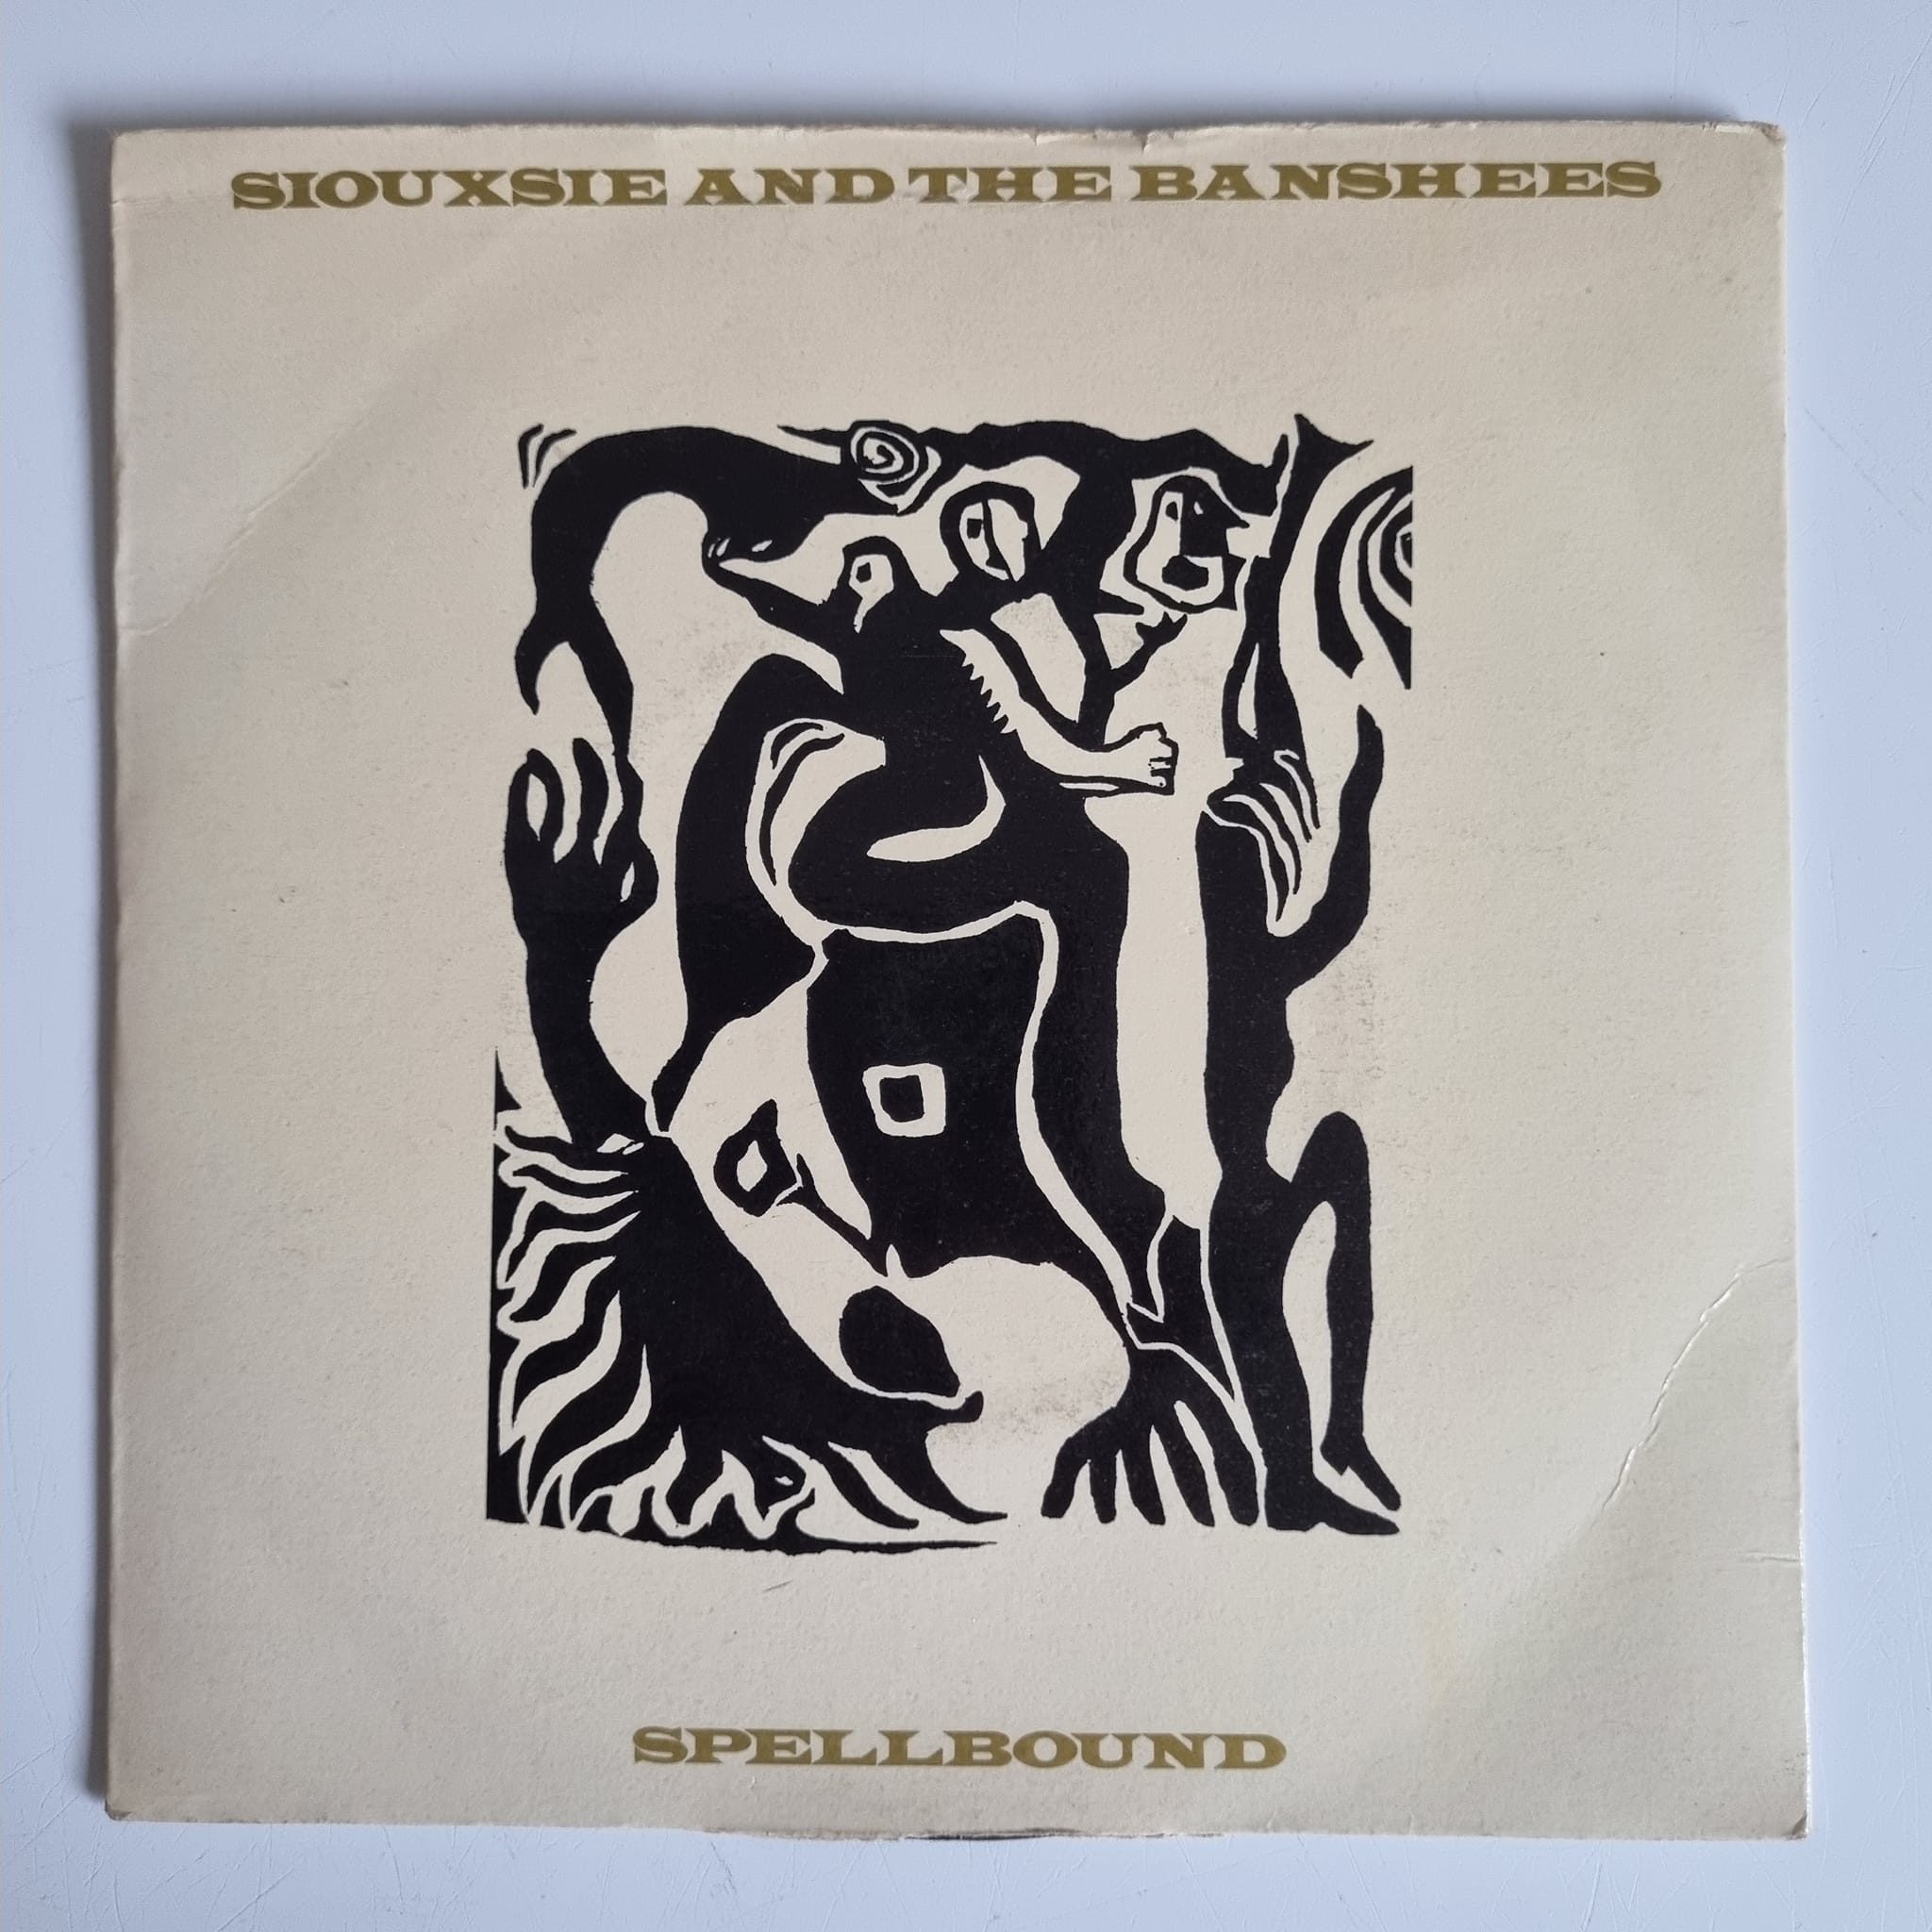 Buy this rare Siouxsie & Banshees record by clicking here